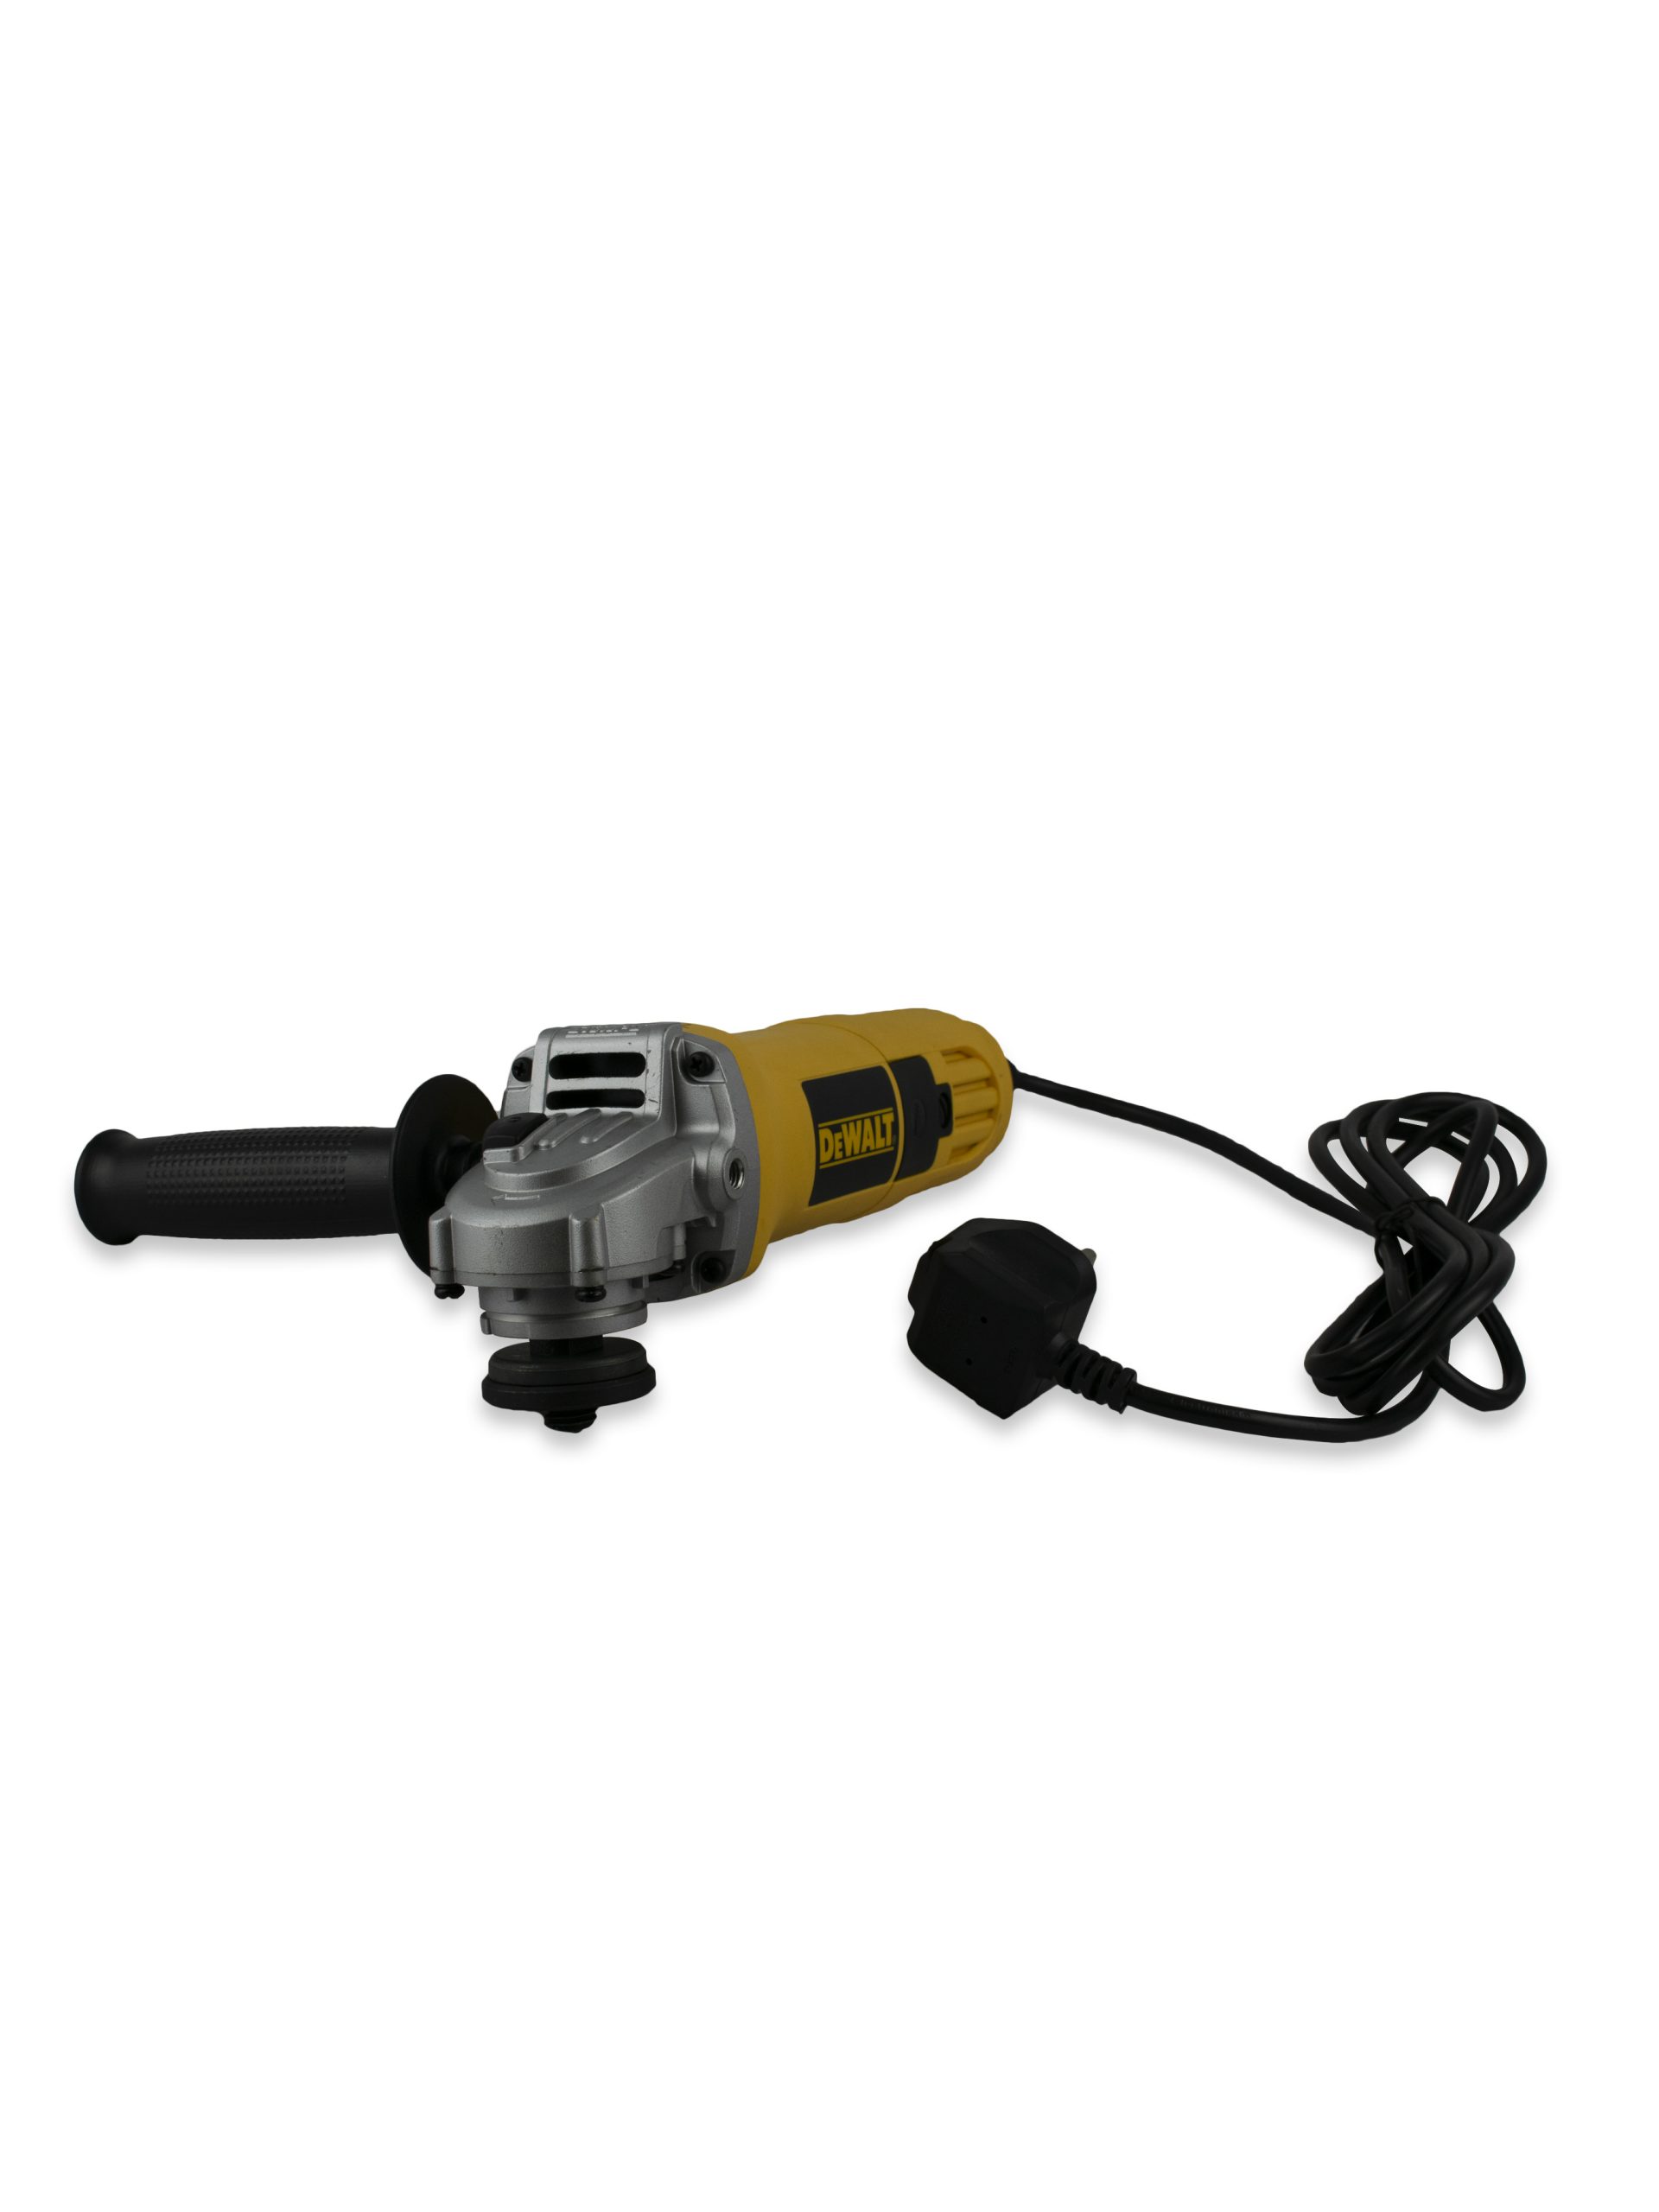 TOGGLE SWITCH ANGLE GRINDER 115MM 730W in UAE